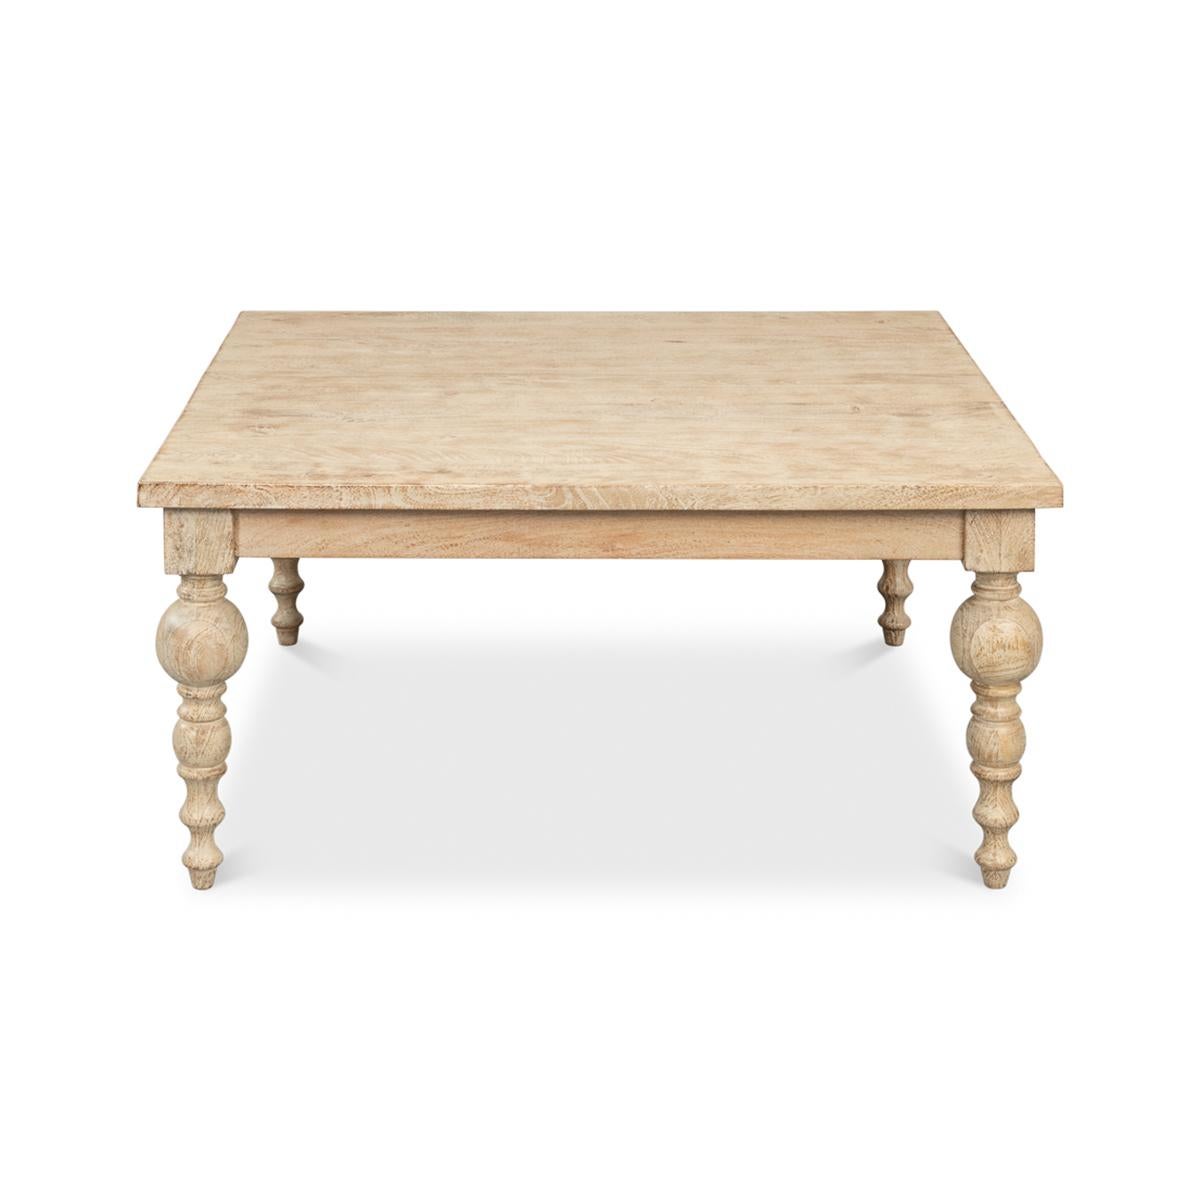 Organic natural coffee table with mango wood in our sienna finish, with bold, turned and tapered legs.

Dimensions: 39